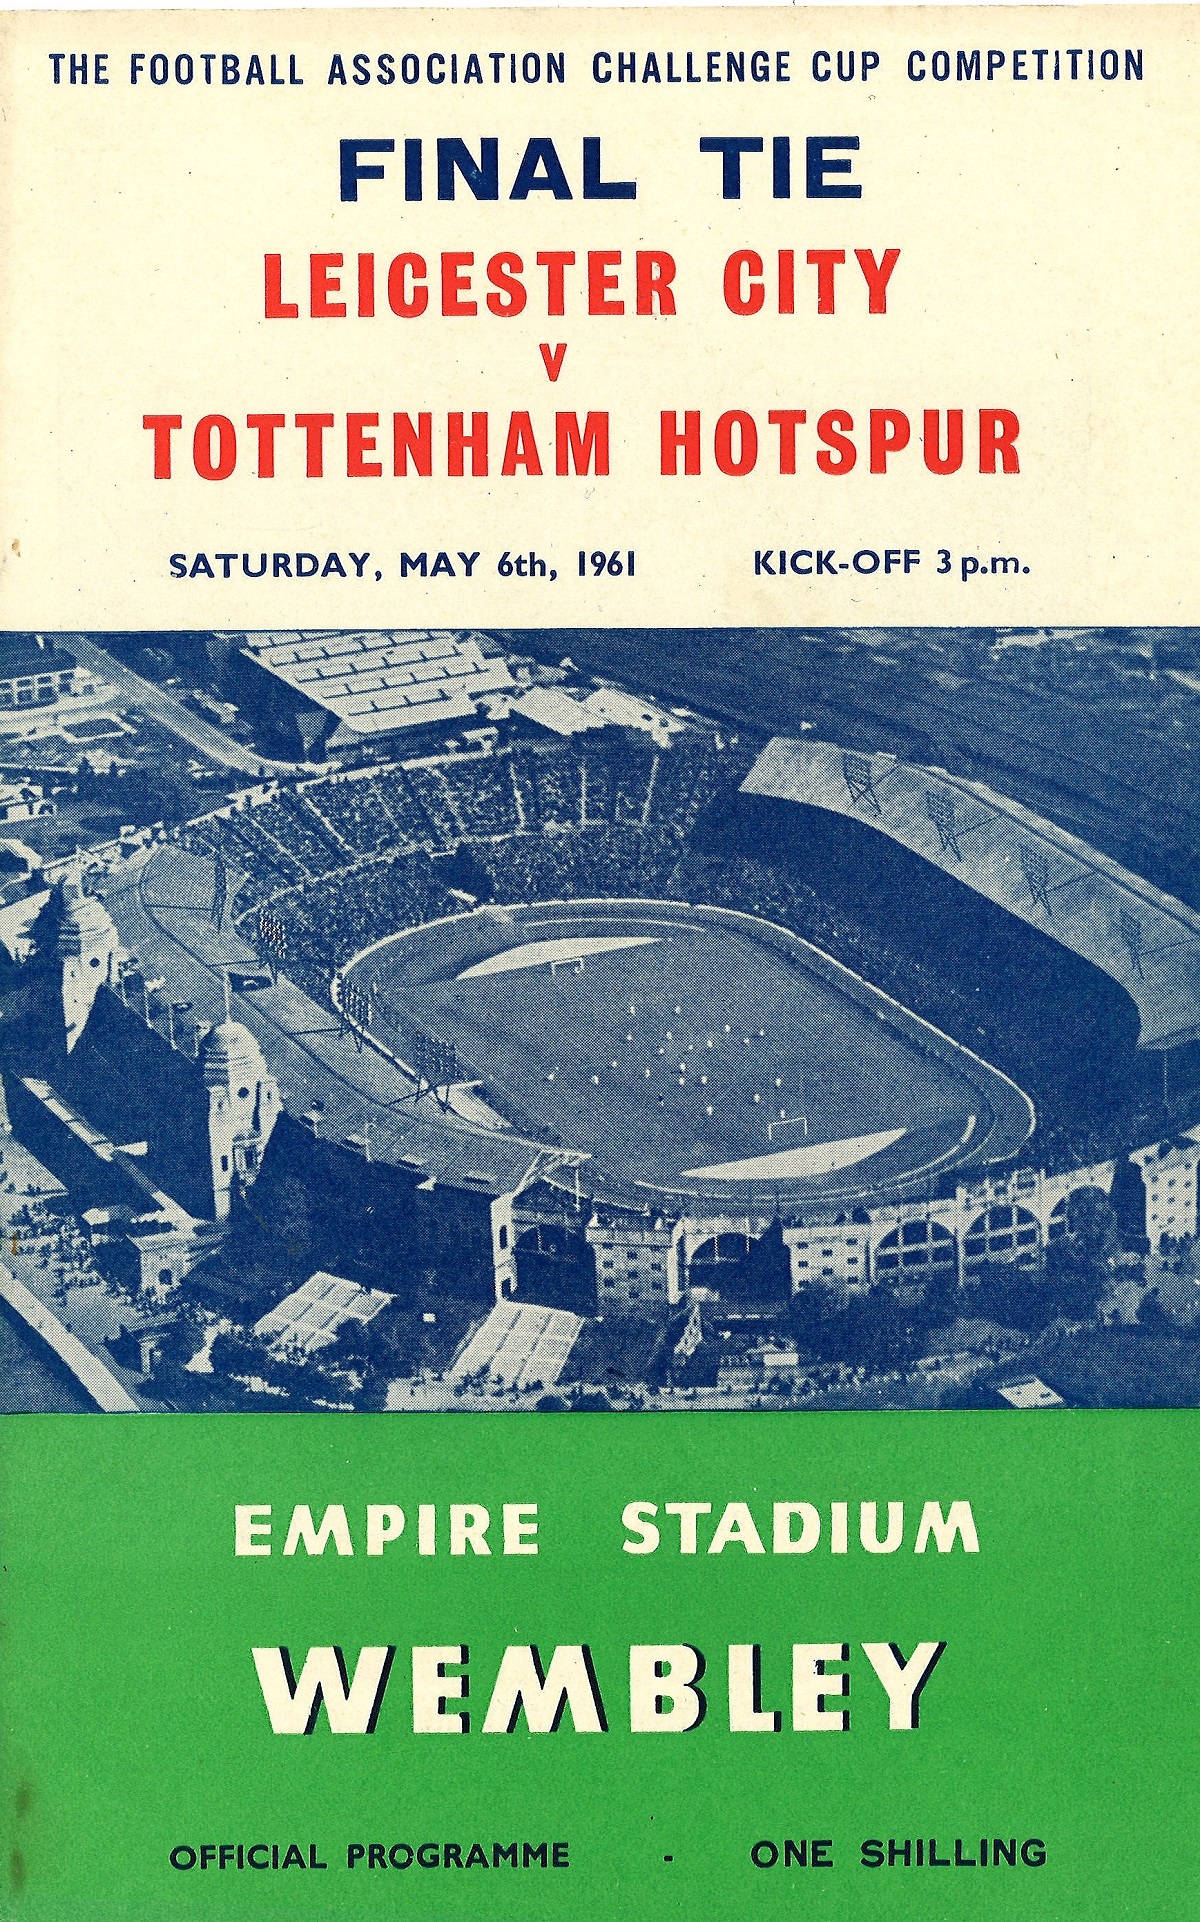 Football Leicester City v Tottenham Hotspur 1961 FA Cup Final signes 16x12 black and white photo - Image 2 of 2